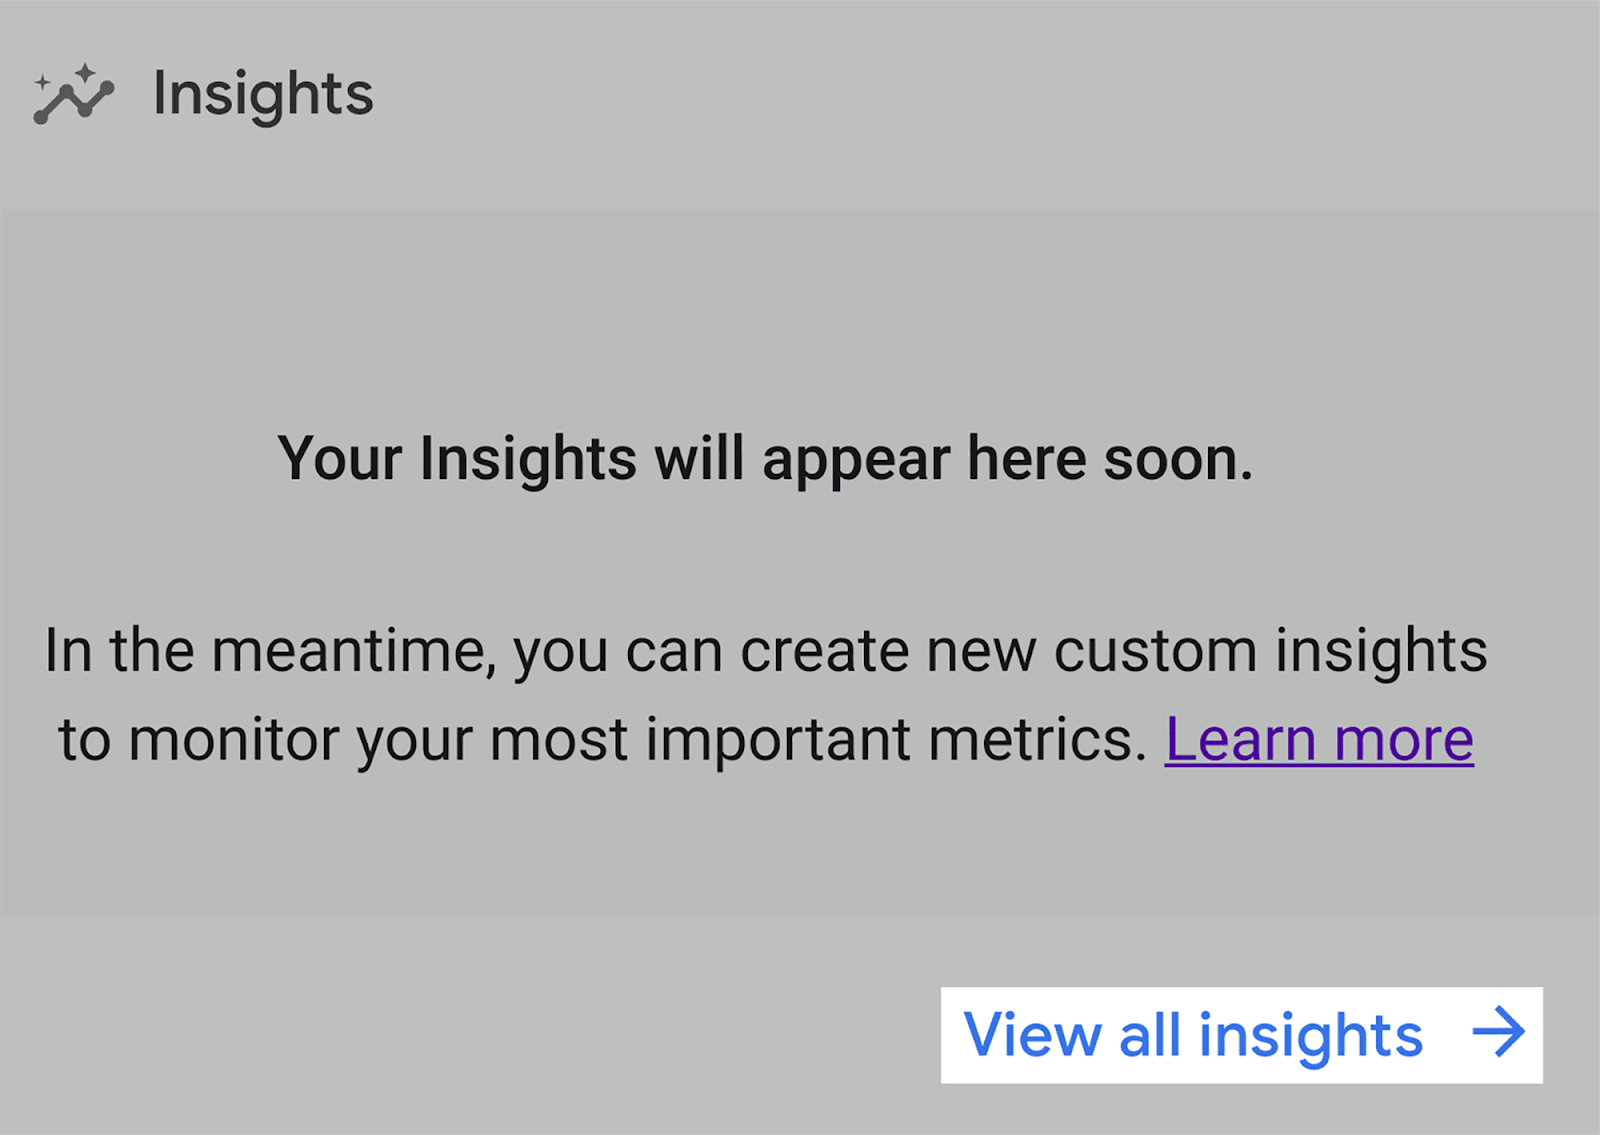 View all insights